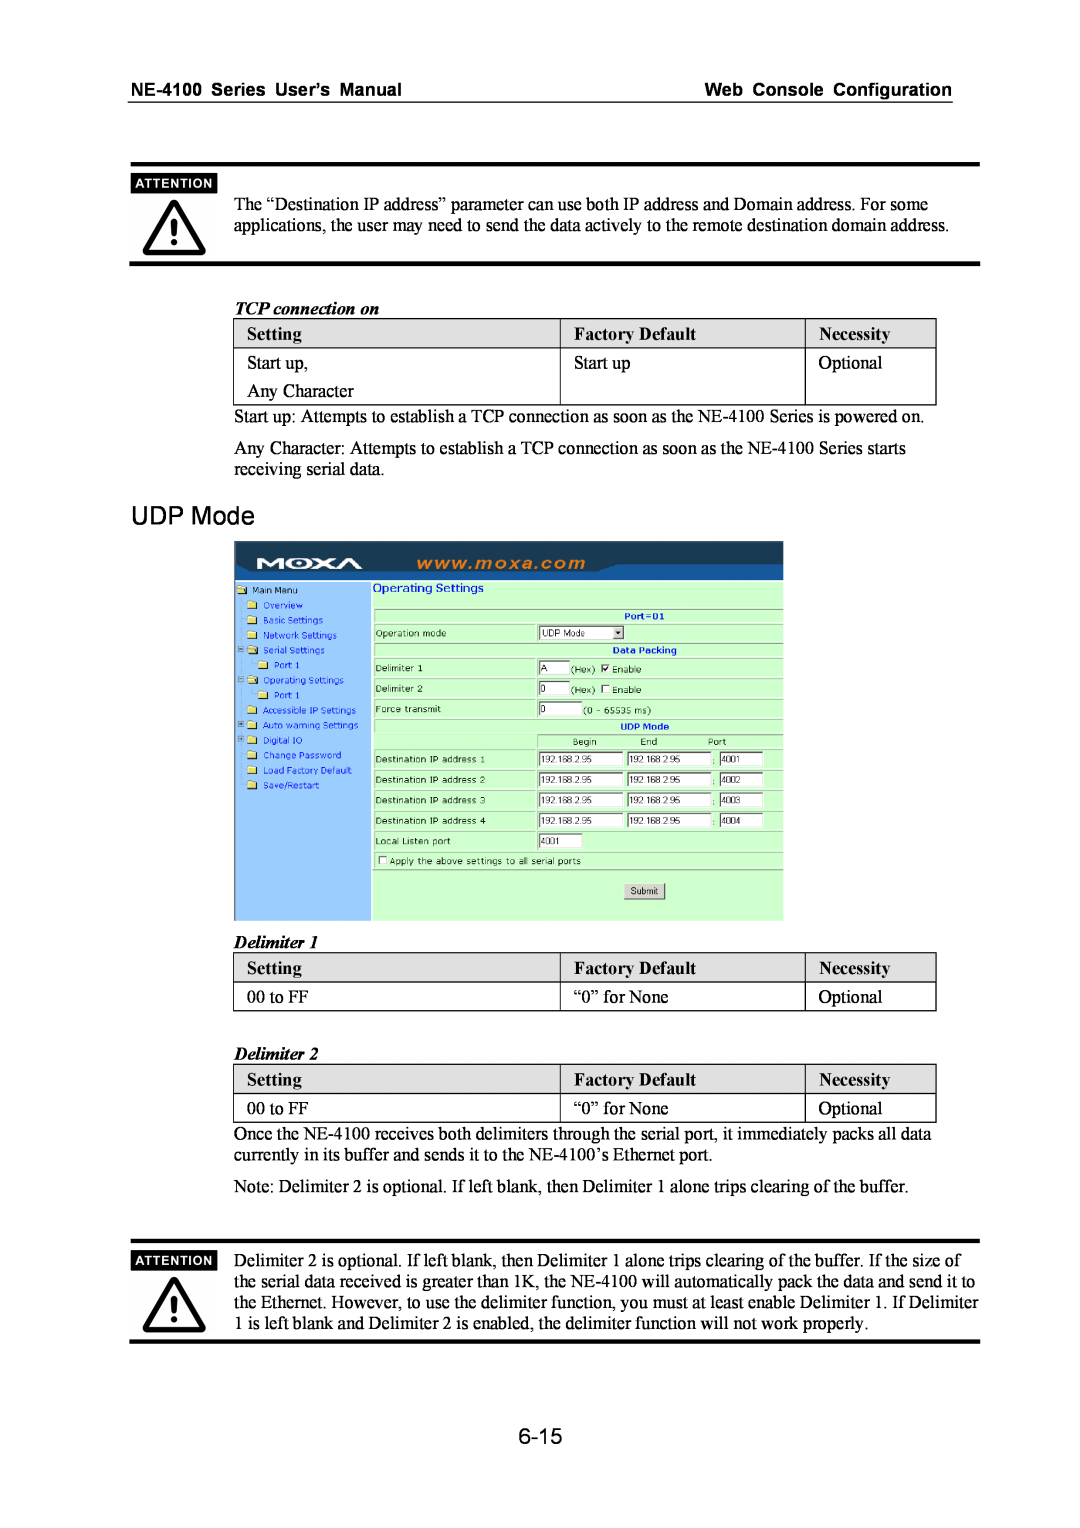 Moxa Technologies UDP Mode, 6-15, NE-4100 Series User’s Manual, Web Console Configuration, TCP connection on, Delimiter 